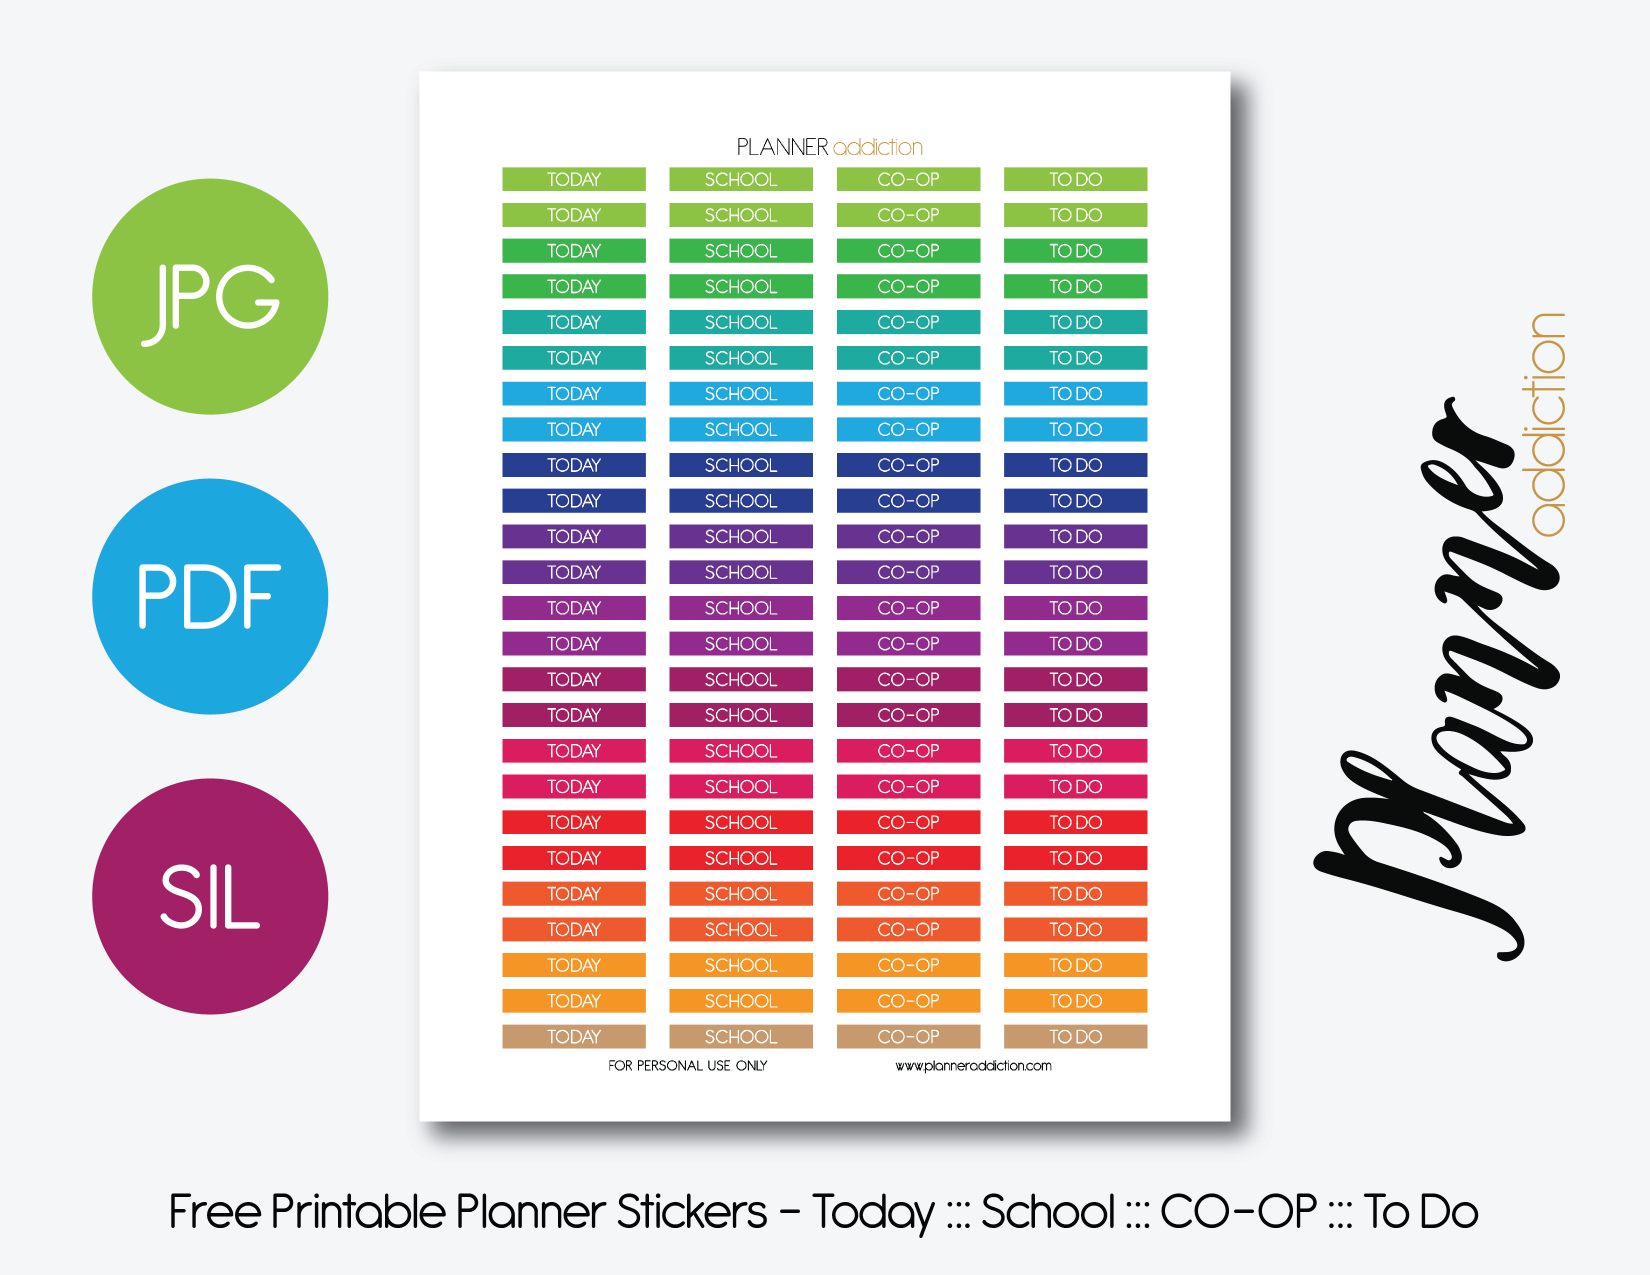 Free Printable Planner Stickers – Planner Addiction - Free Printable Stickers